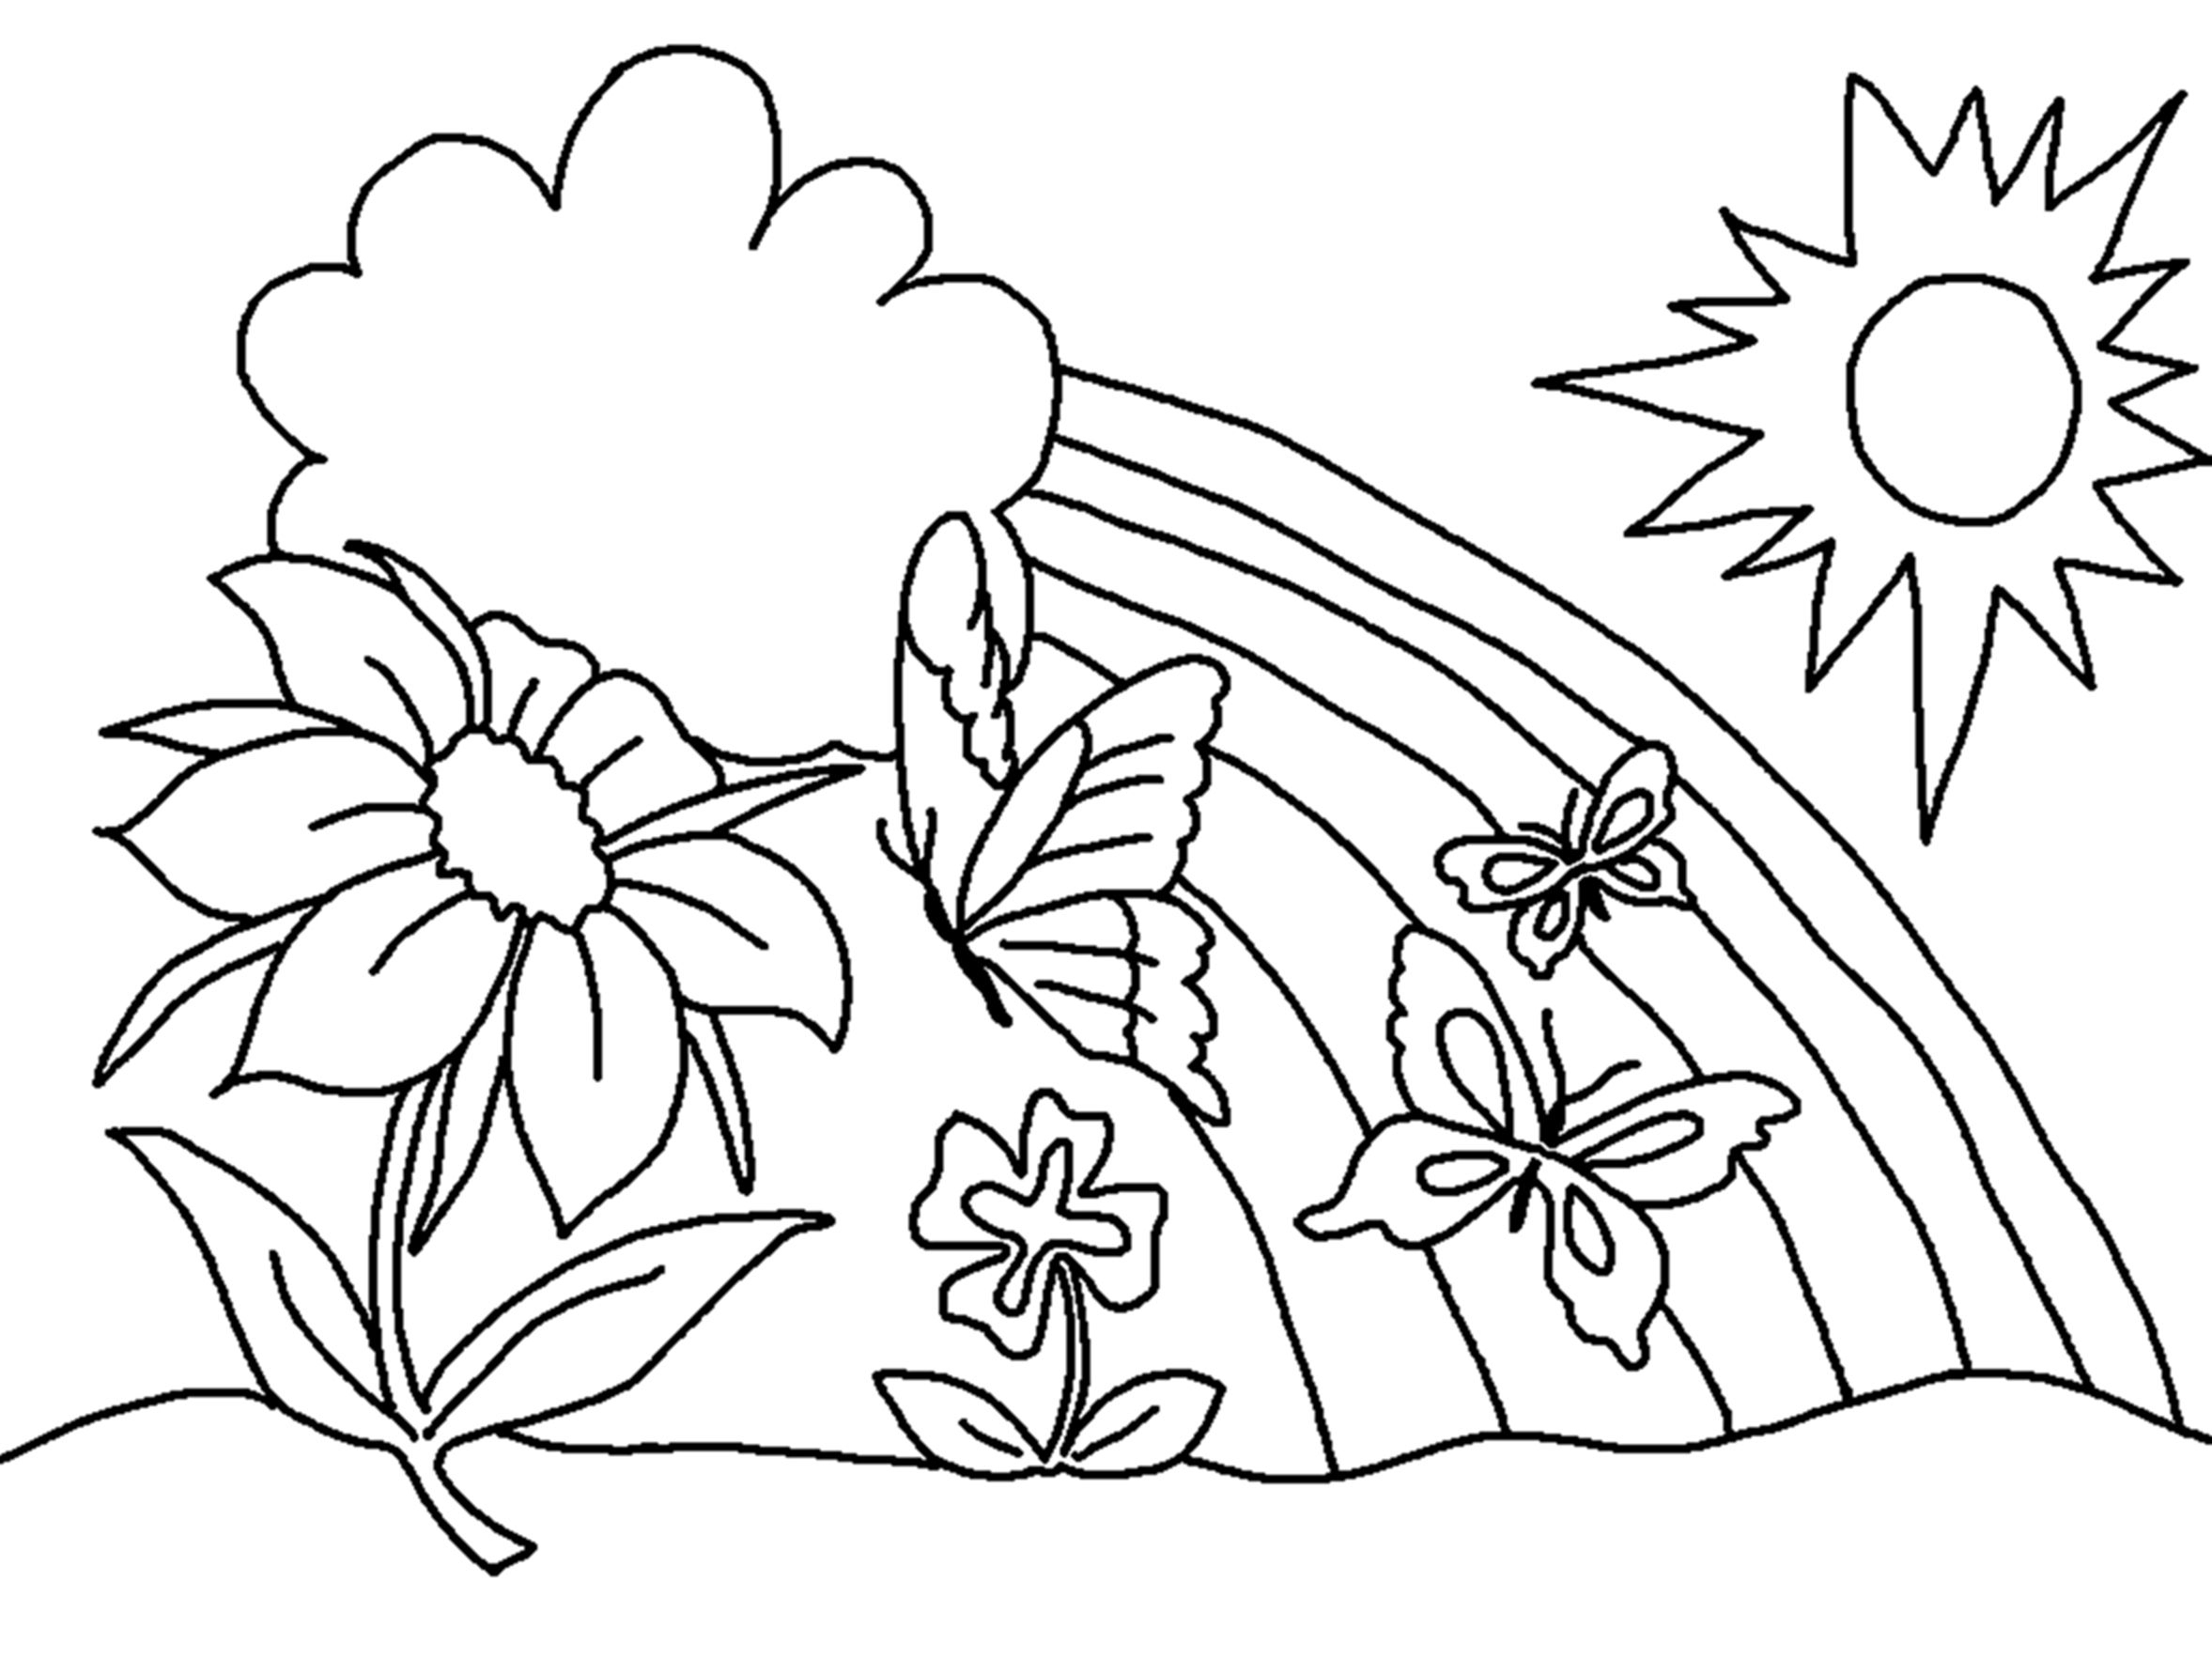 Free Printable Coloring Pages For Preschoolers – With Girls Also - Free Printable Flower Coloring Pages